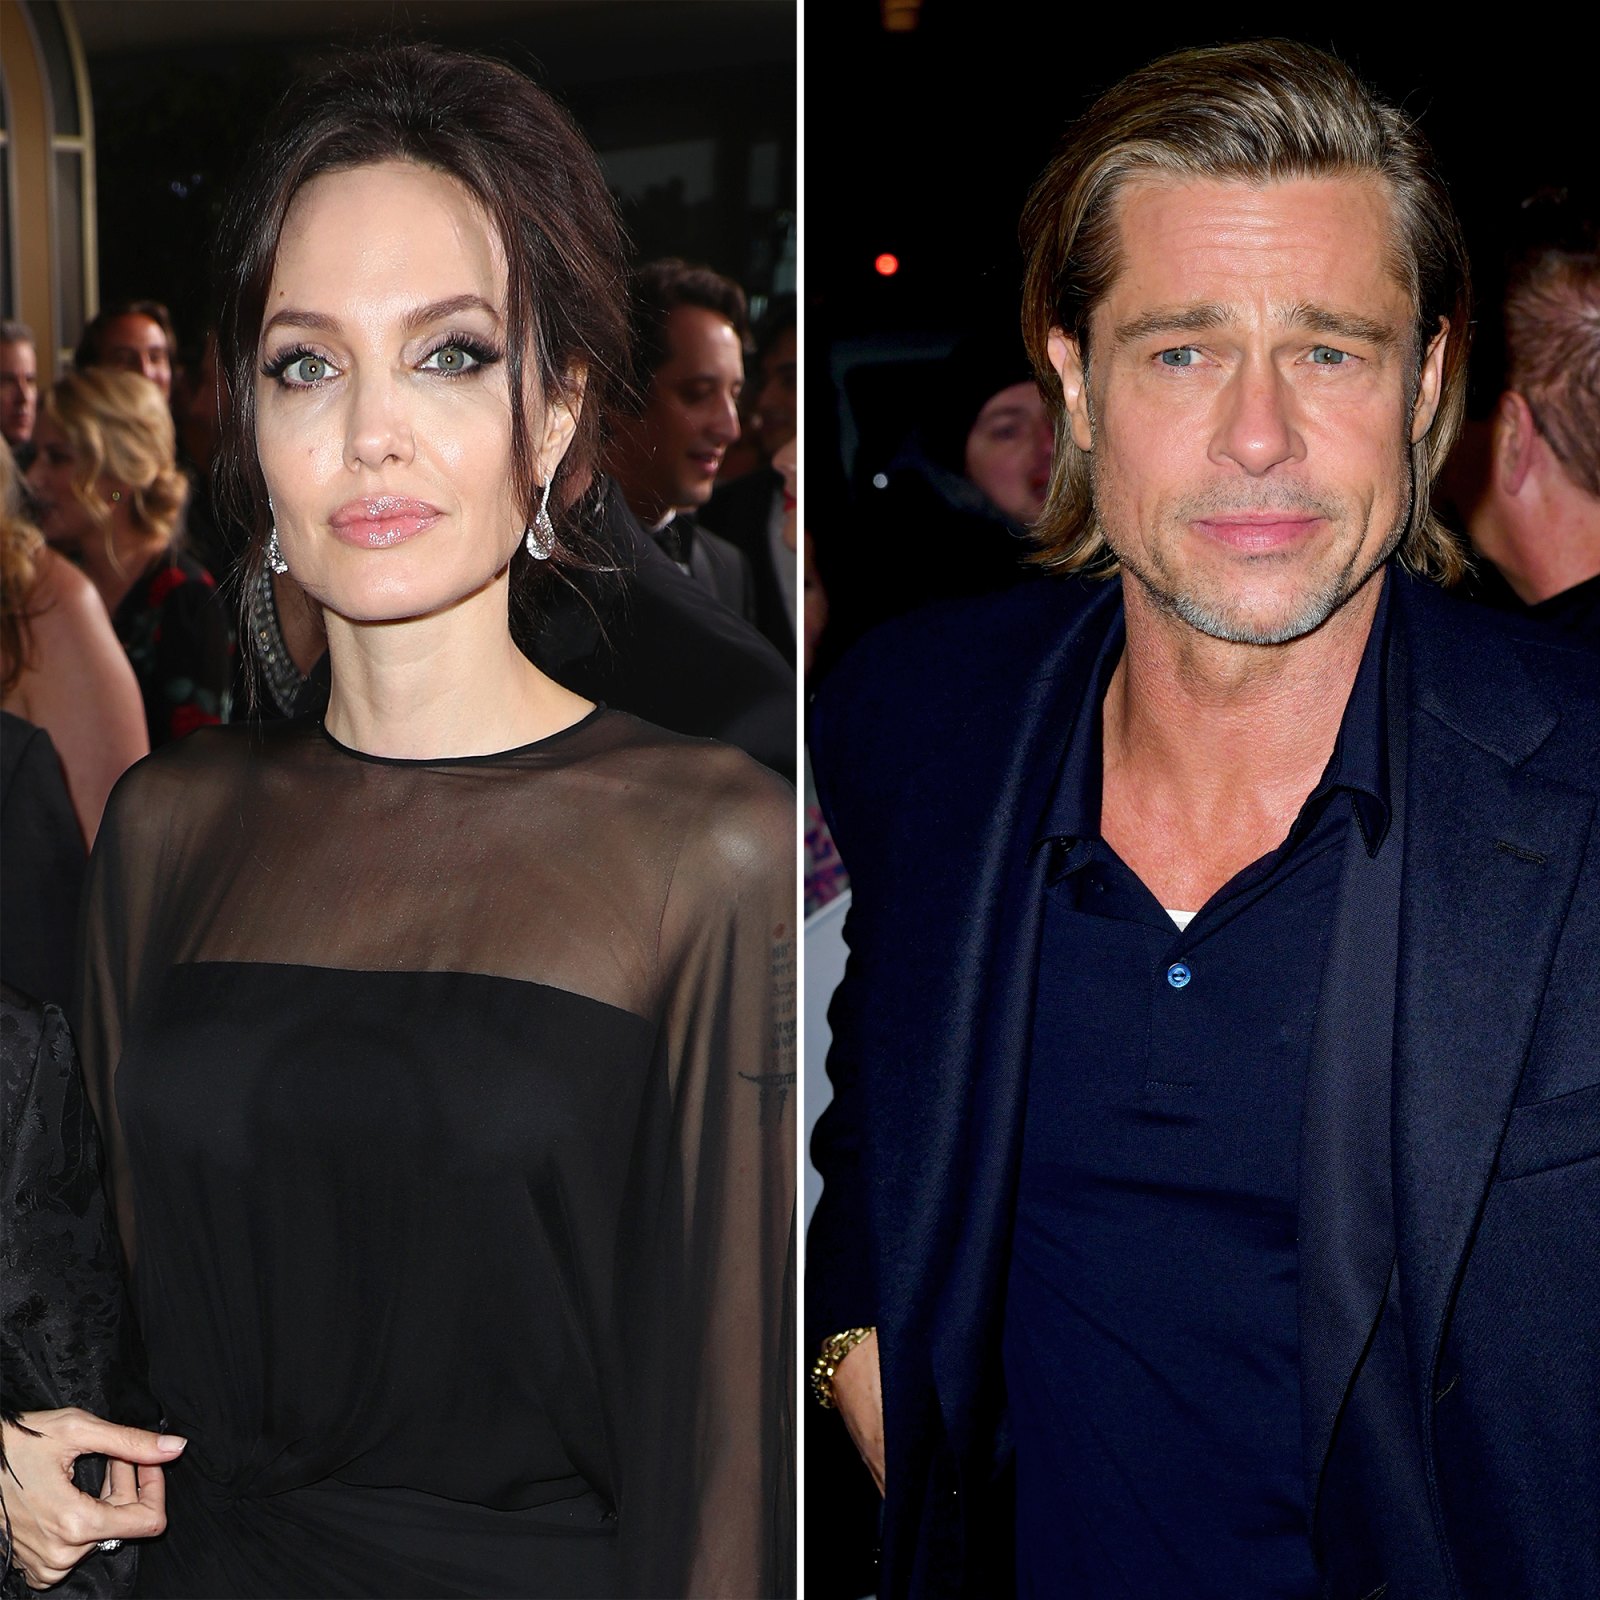 Angelina Jolie’s Lawyers Claim in Court Papers Brad Pitt Abuse Started ‘Well Before’ 2016 Plane Incident